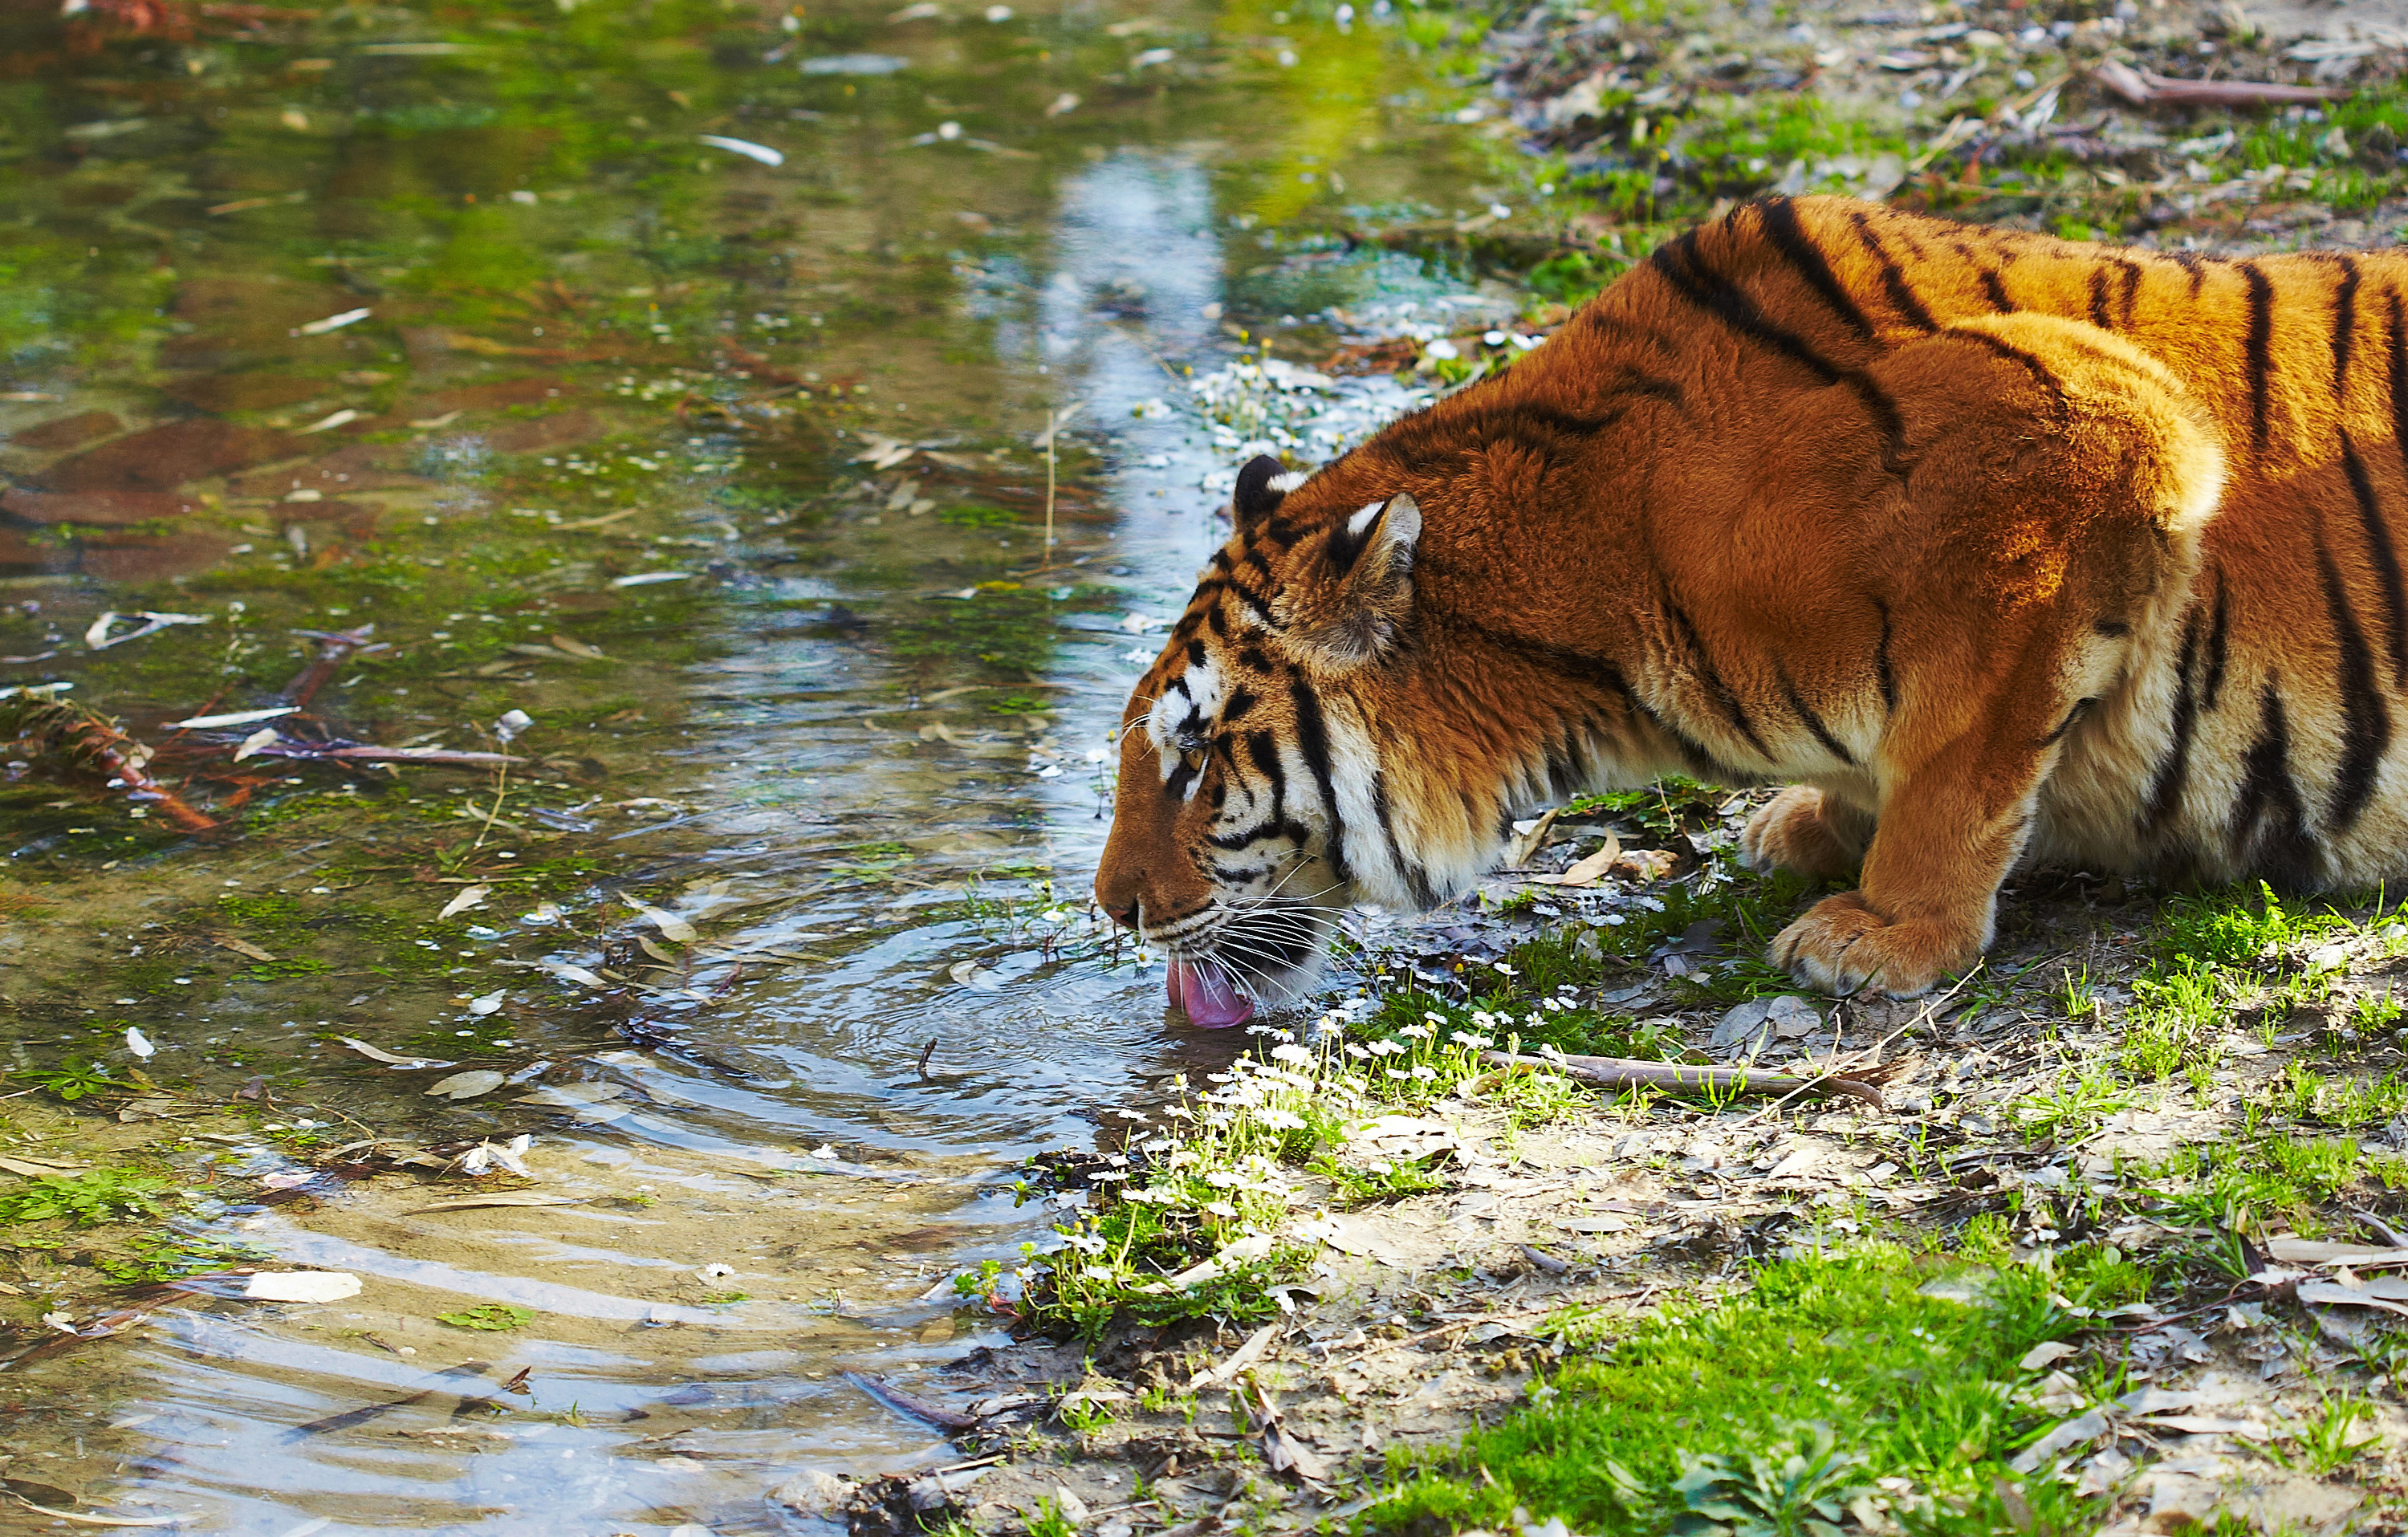 A Bengal tiger drinks from a river